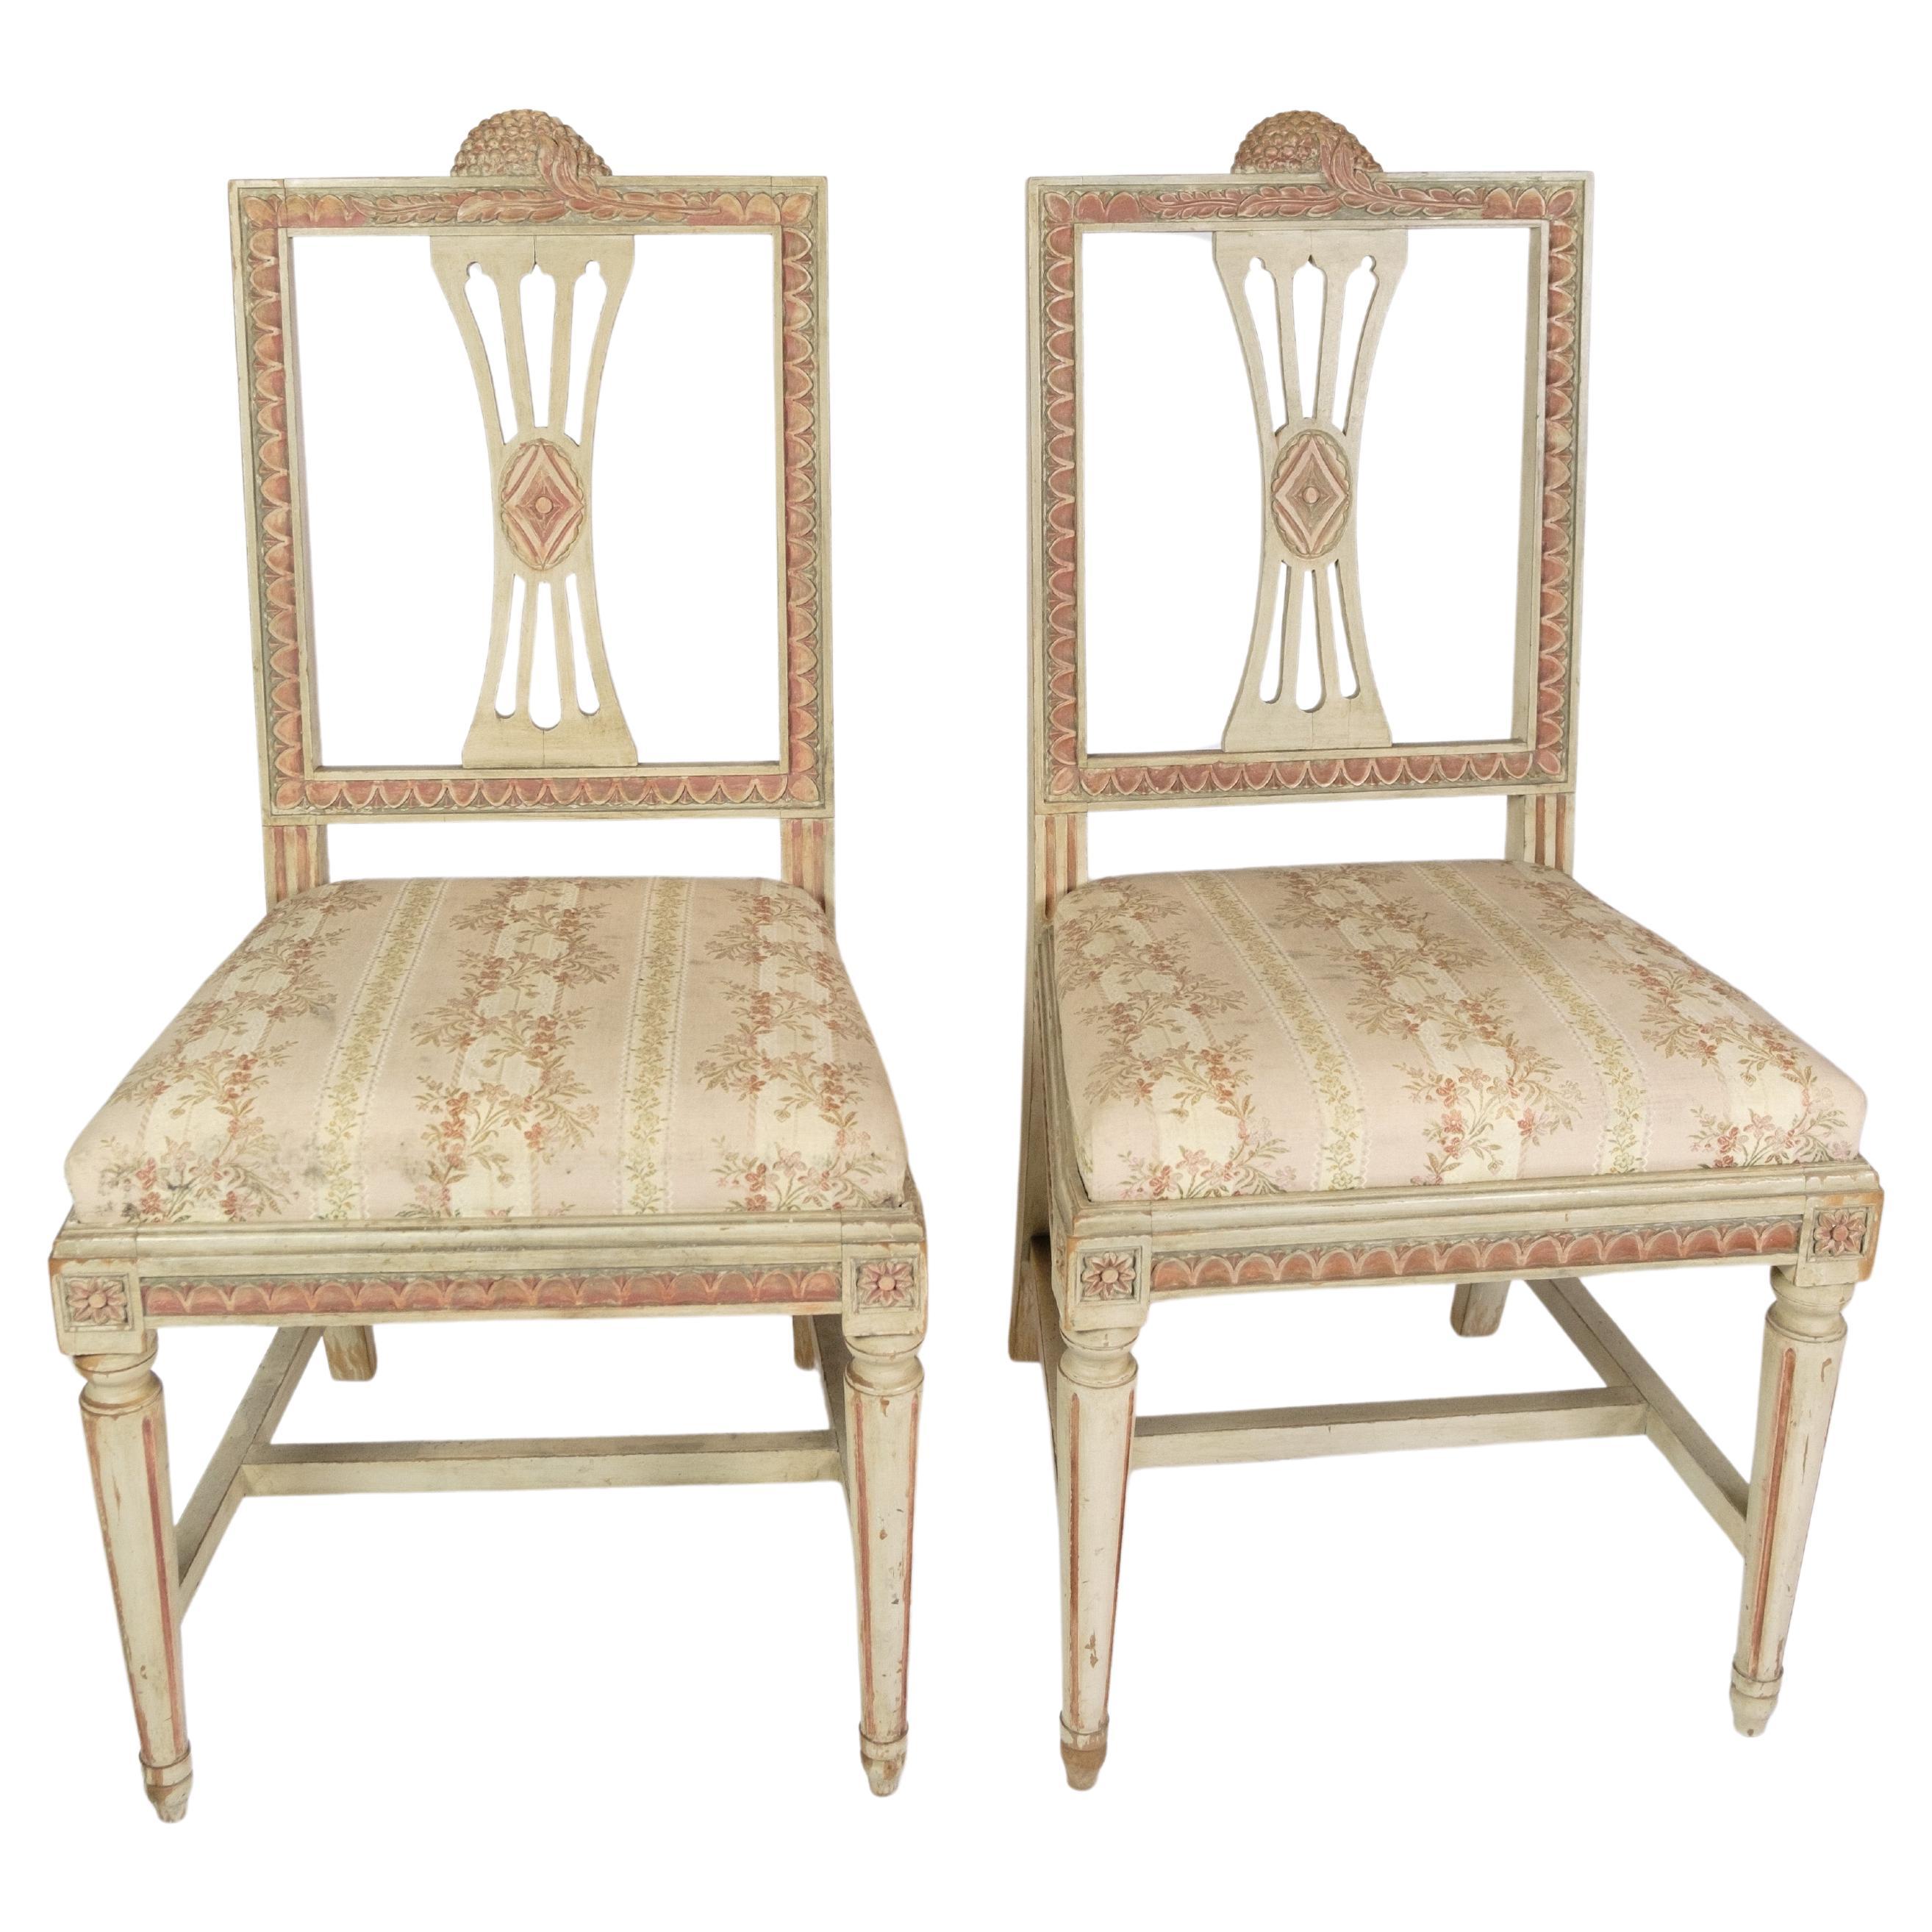 A Set Of 2 Gustavian Style Chairs From 1880s  For Sale